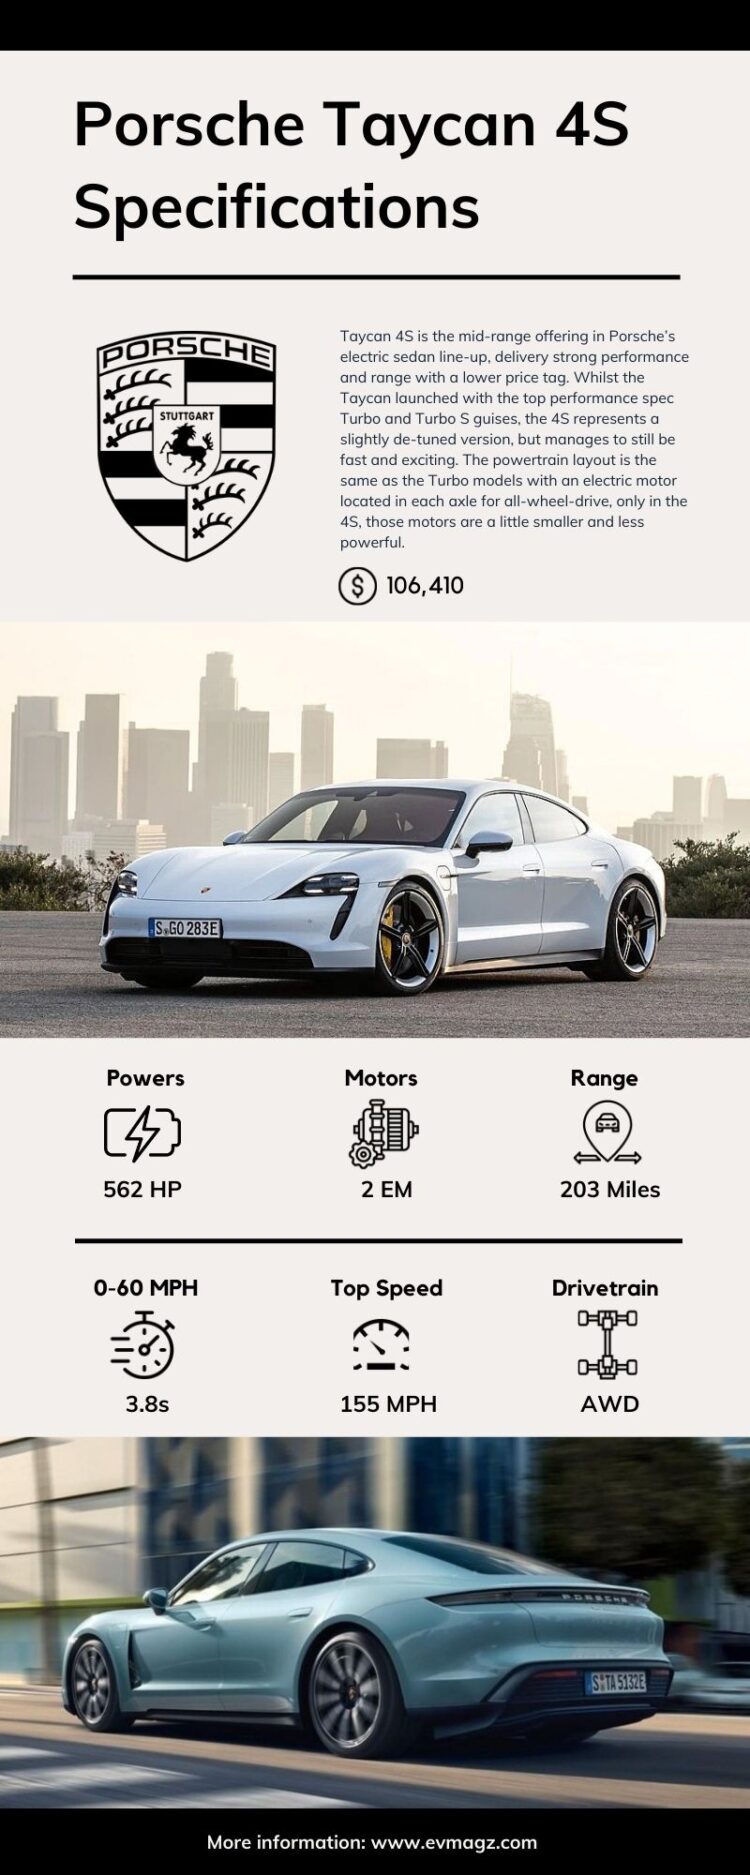 Porsche Taycan 4S Price and Specifications [Infographic]